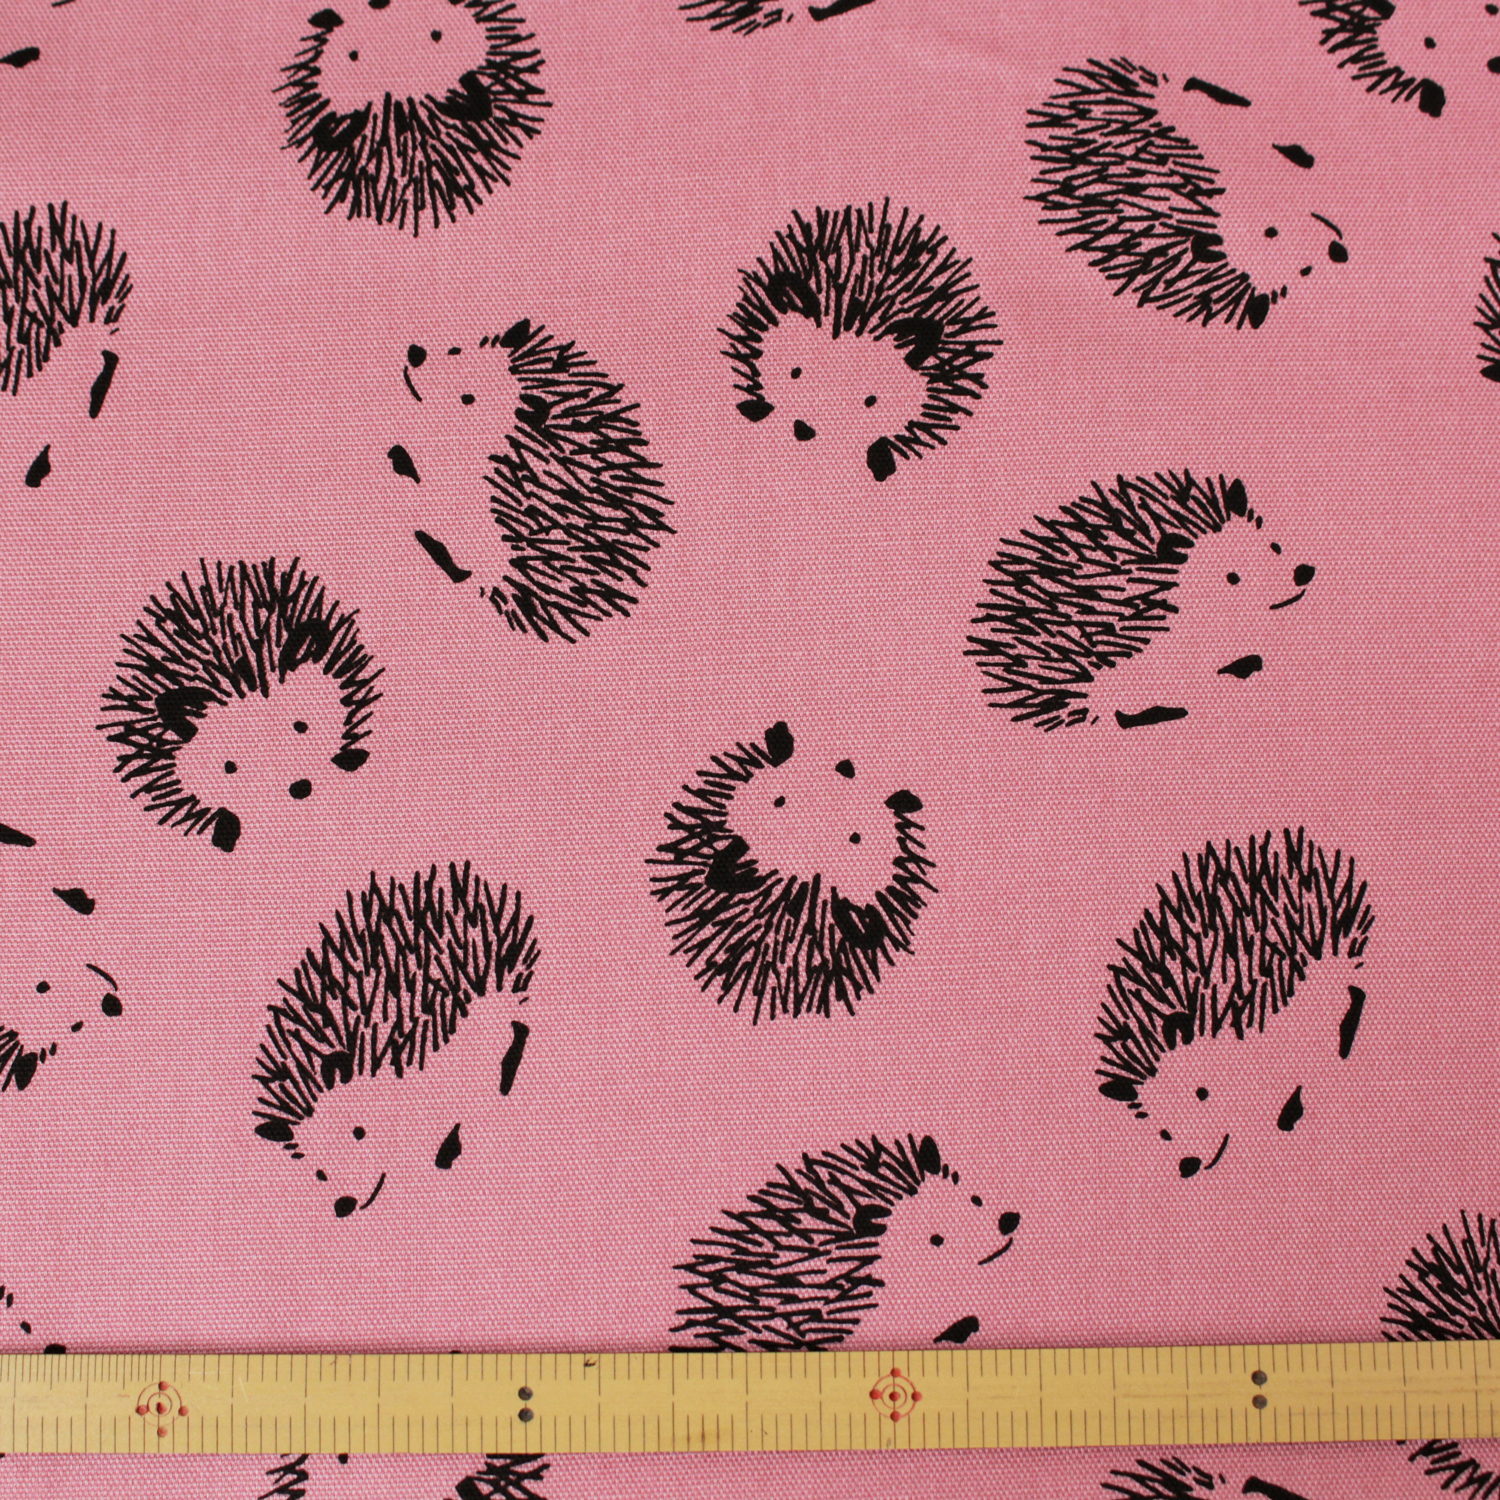 [Only on Online Shop]■7097-2B Cotton OX Fabric pink width 110cm （roll）